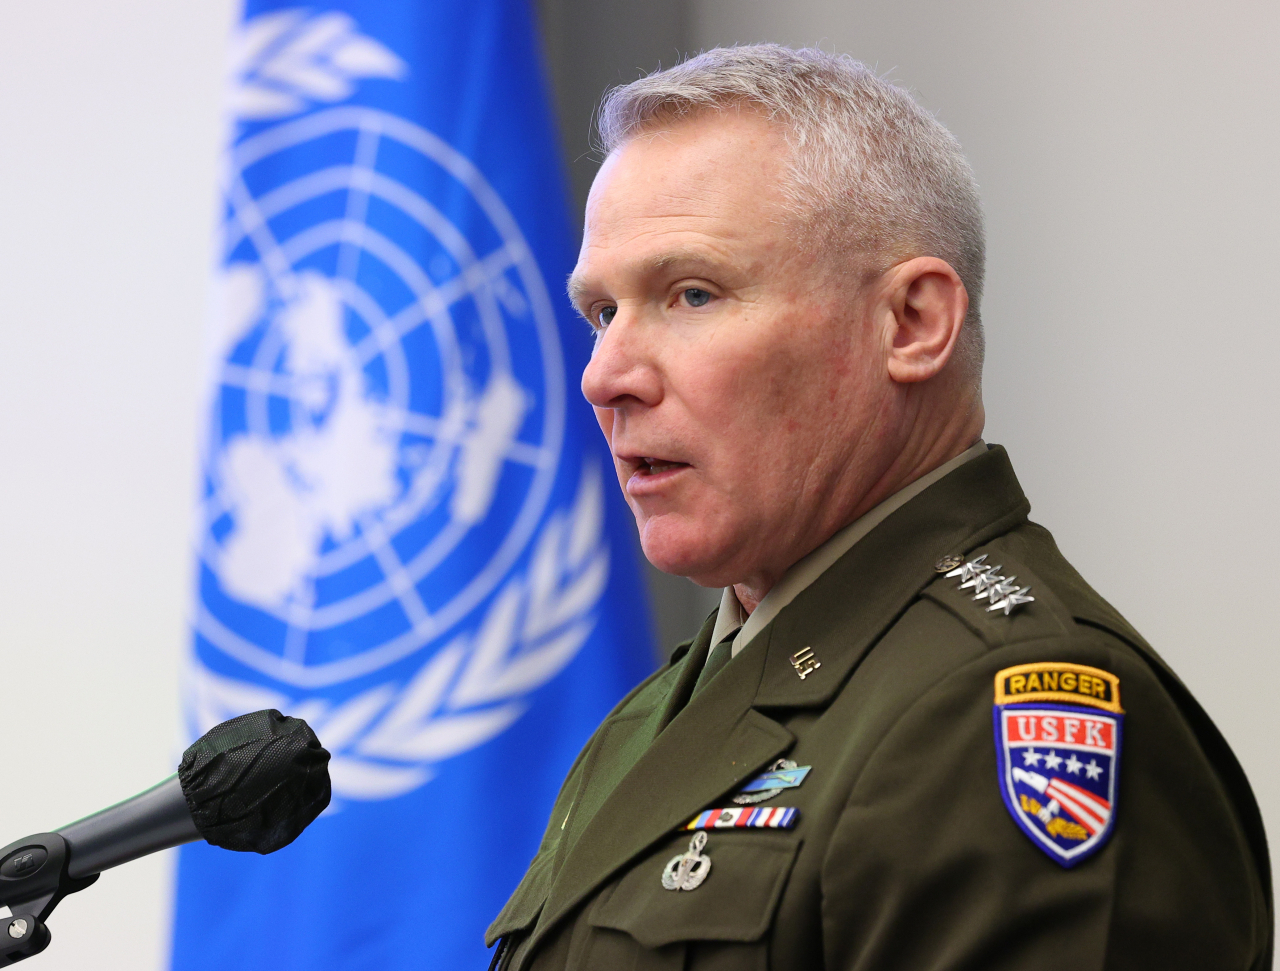 UN Command Commander Gen. Paul LaCamera speaks during a ceremony celebrating the founding of the Korea-UNC Friendship Association in Seoul on Tuesday. (Yonhap)